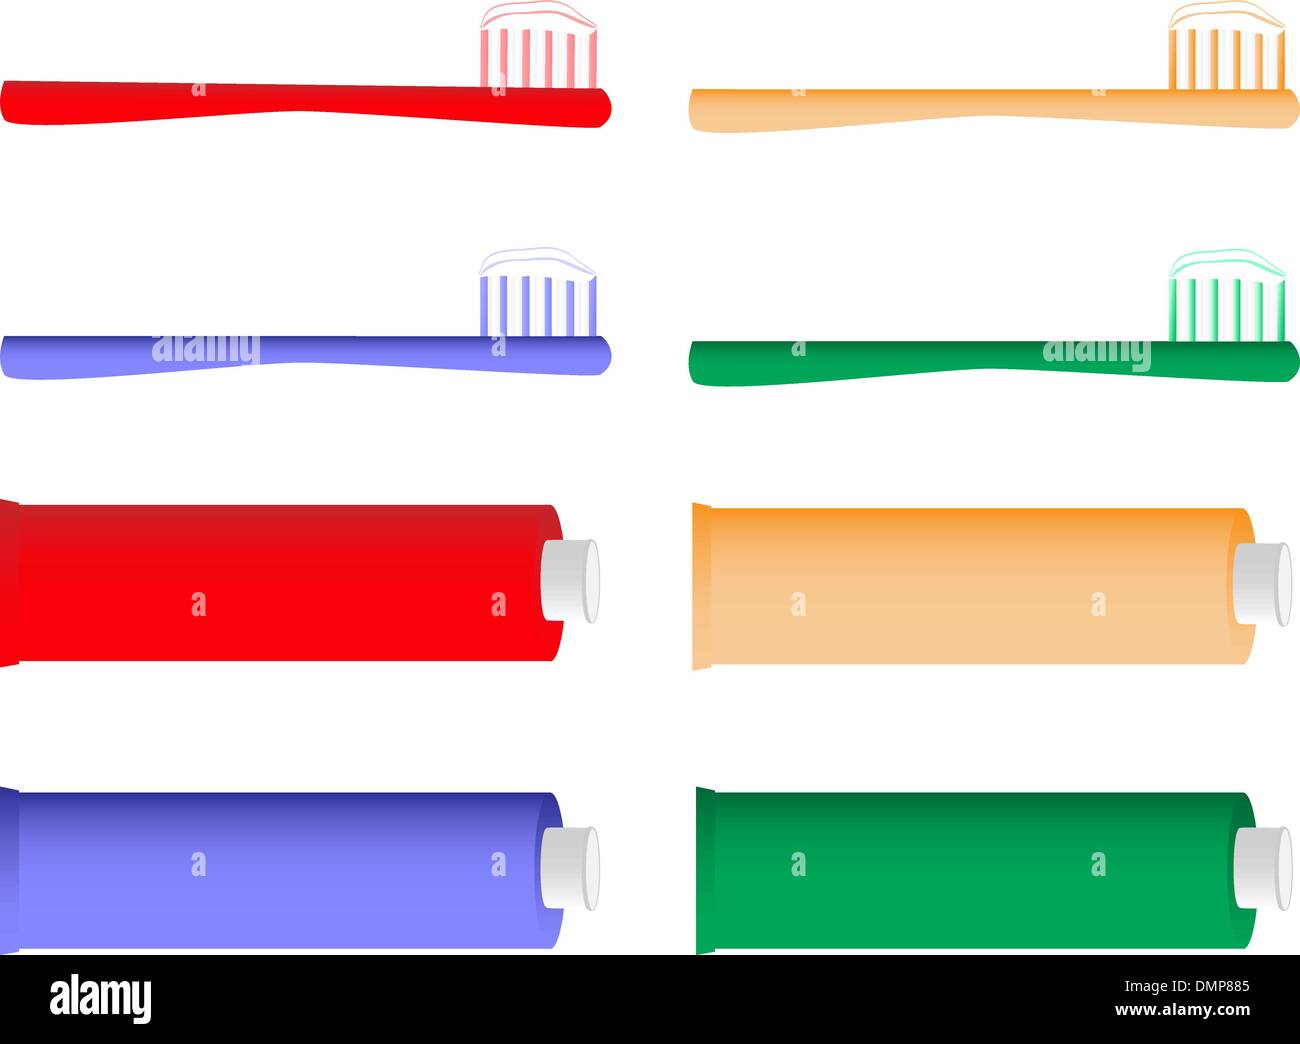 Toothbrush and toothpaste Stock Vector